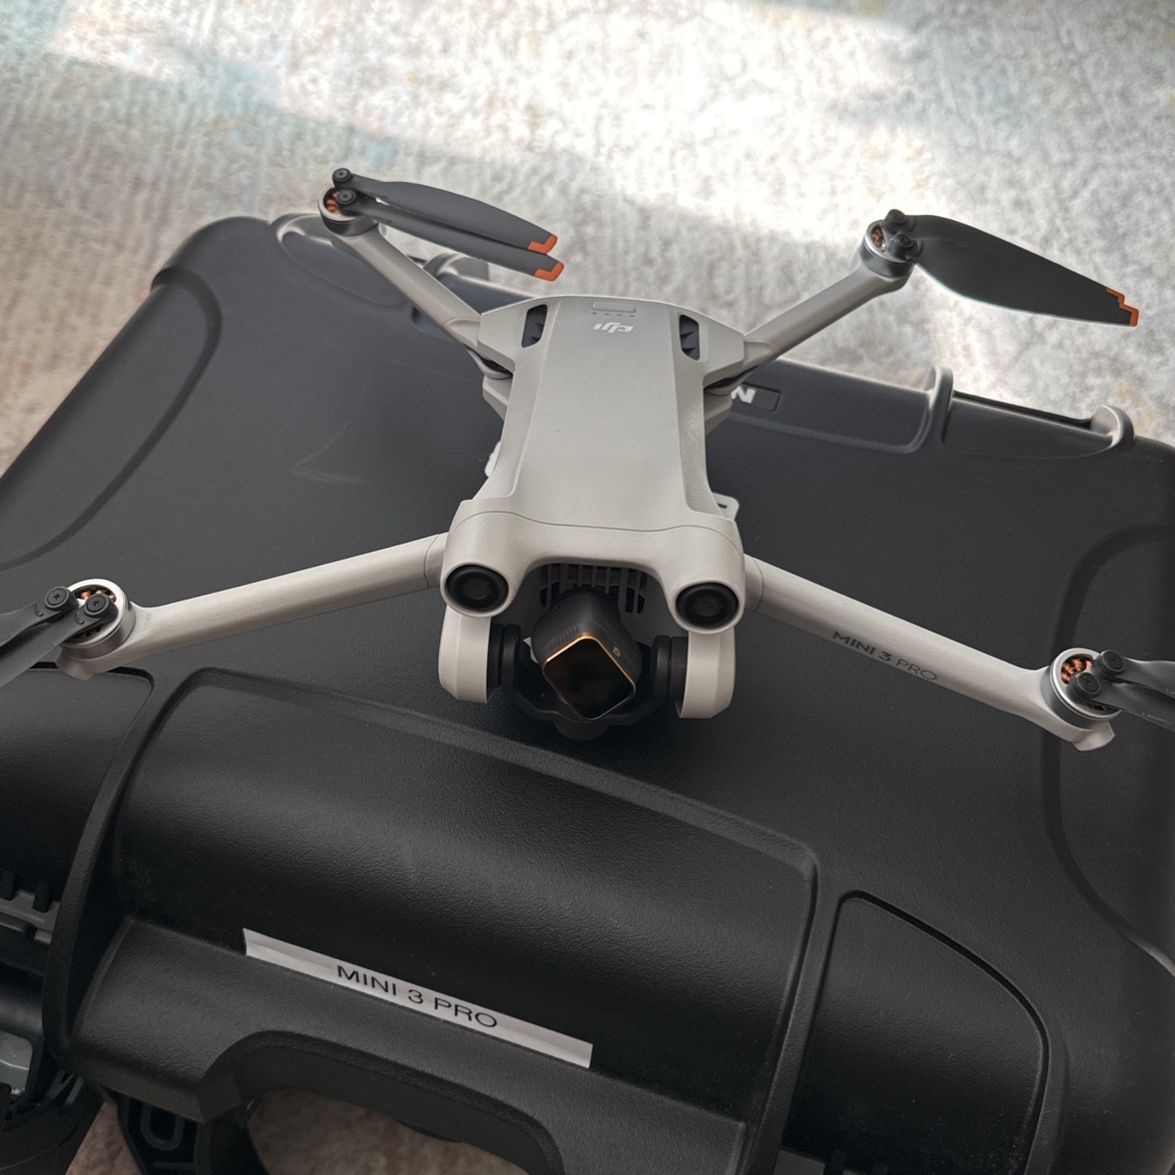 DJI Mini 3 Pro Combo With Accessories and Case